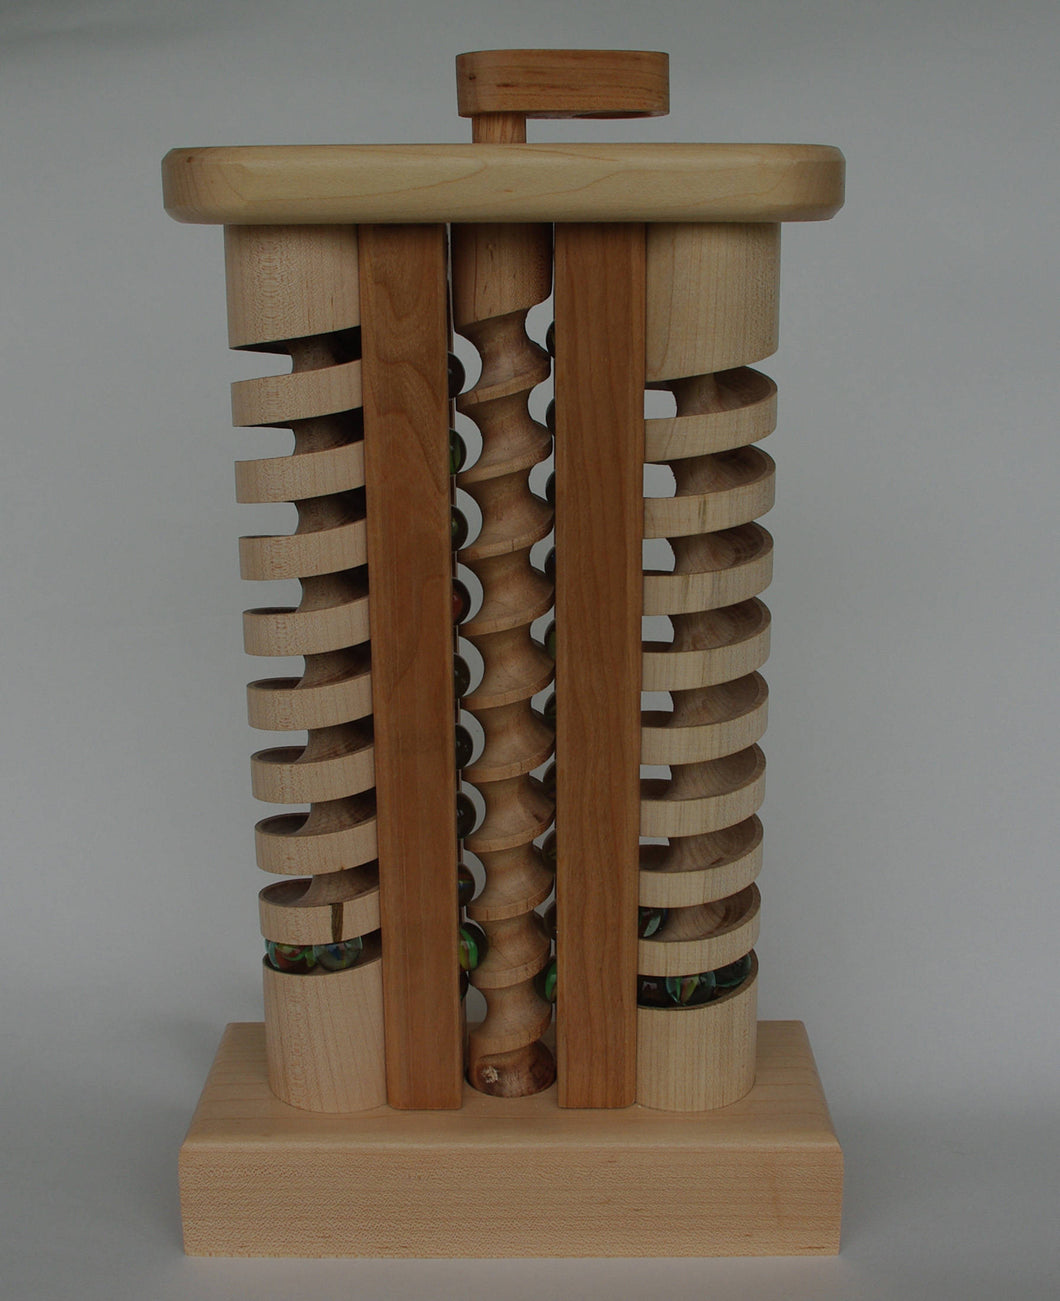 The Mother-in-Law is a wooden toy with marbles made by hand in Vermont.